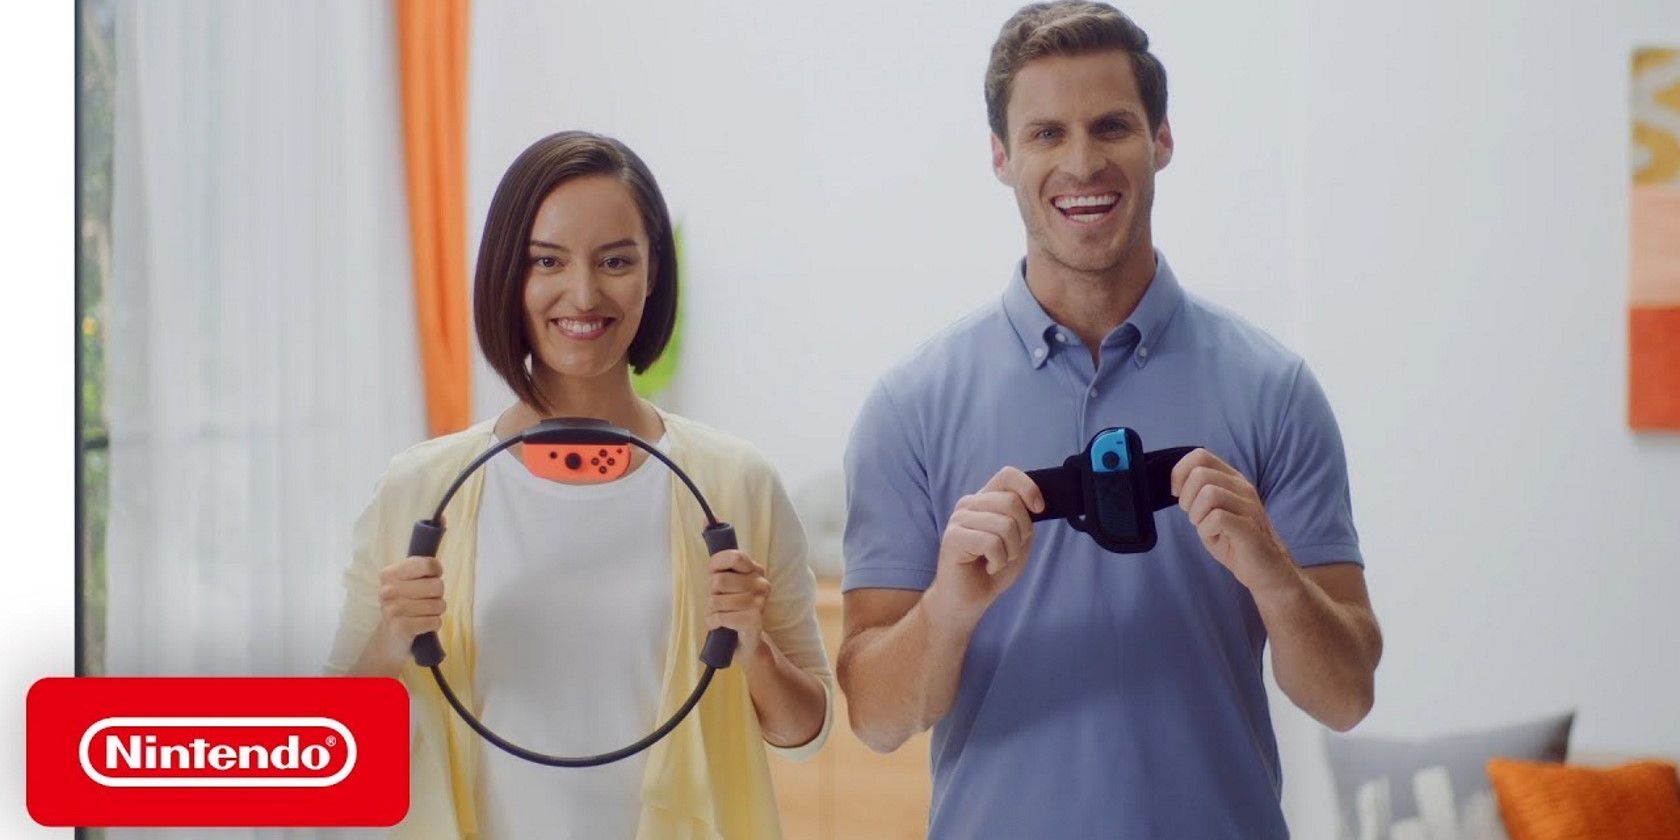 man and woman smiling and holding Nintendo Ring fit adventure device